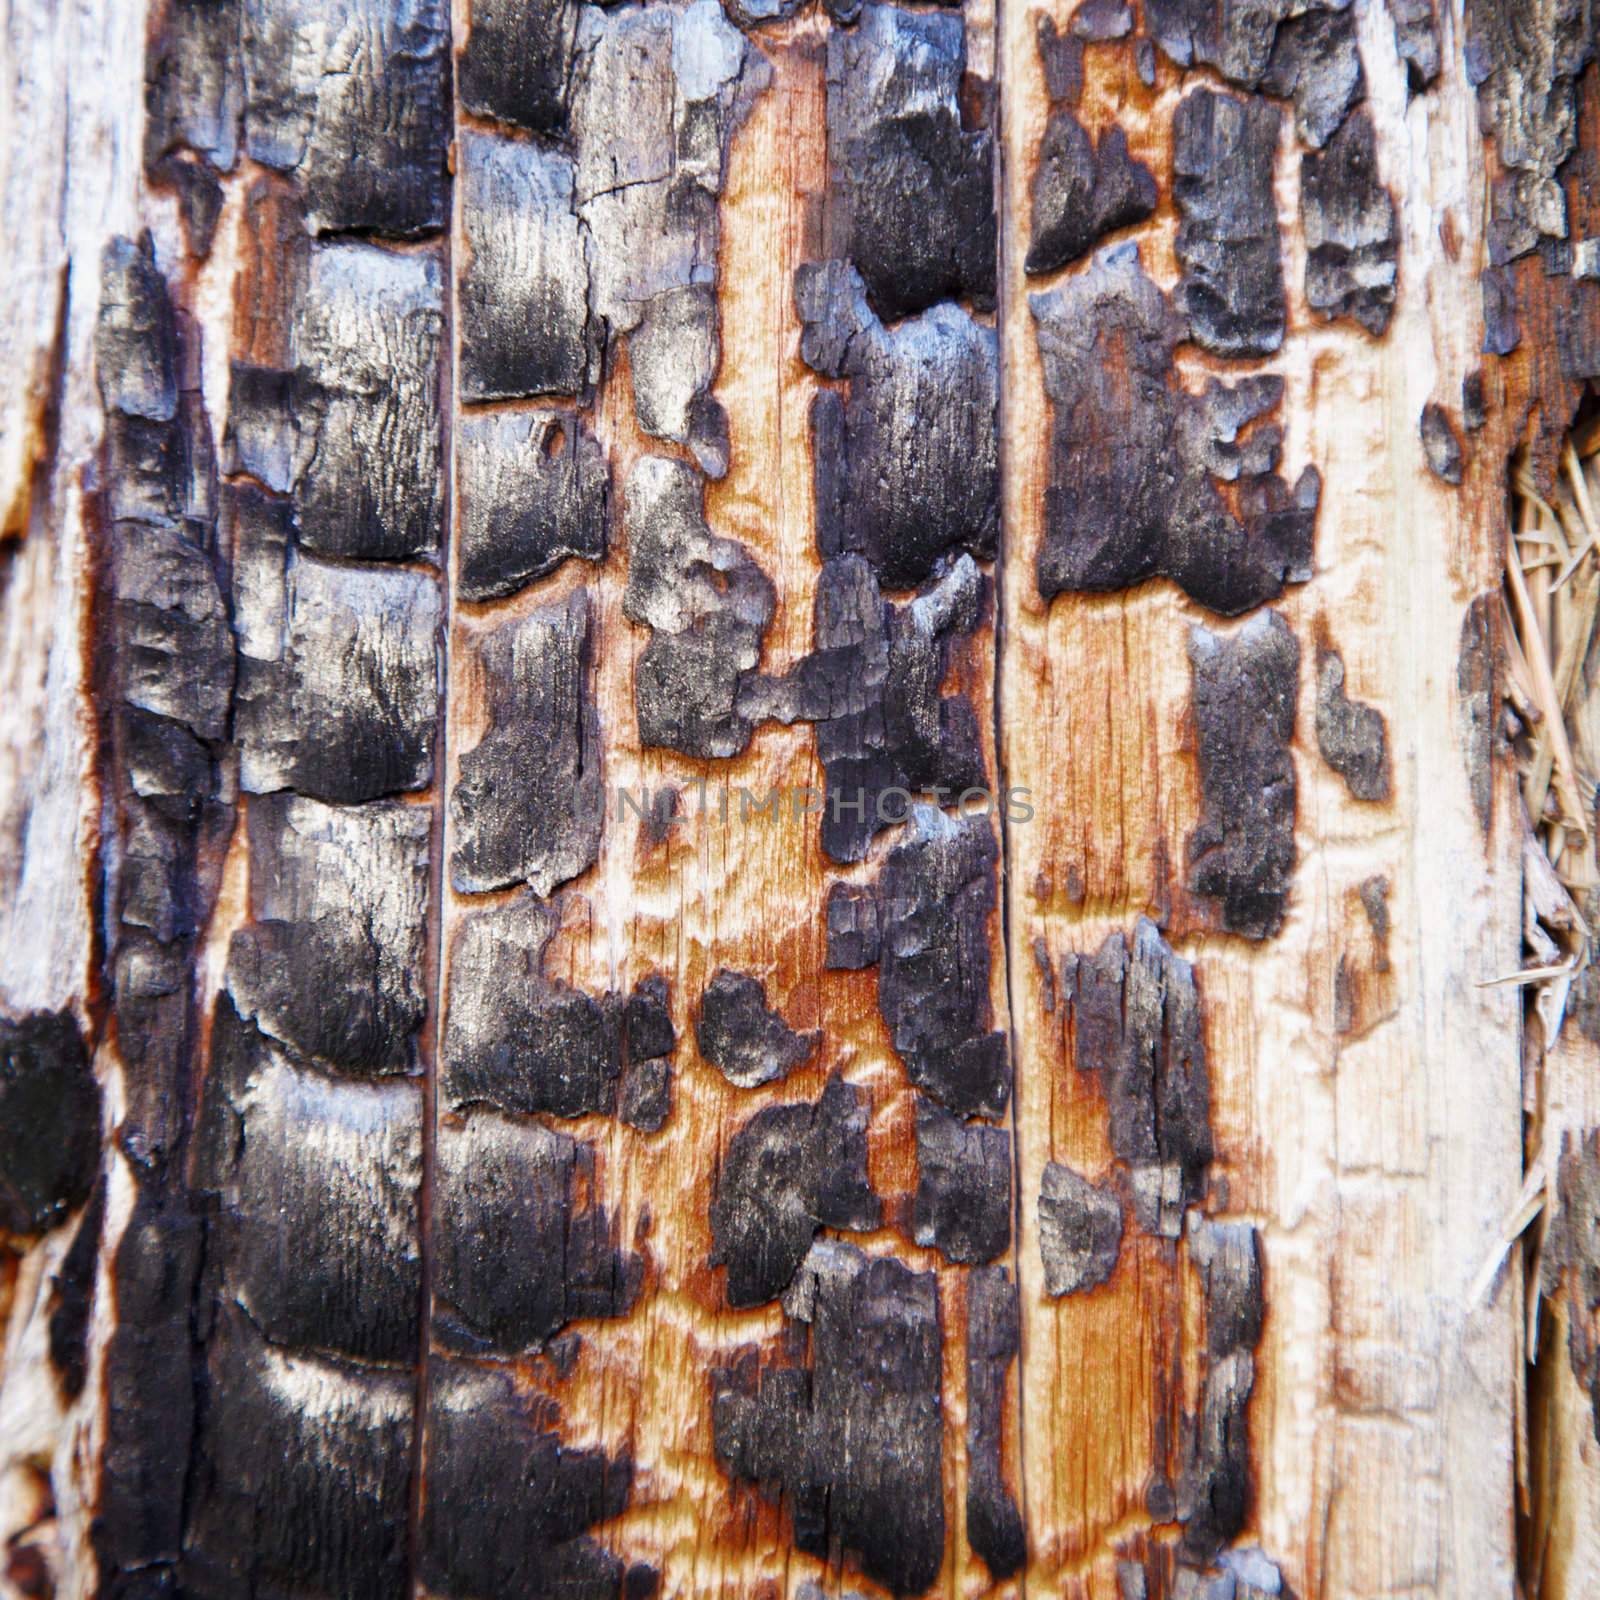 Charred surface of wood after fire by pzaxe